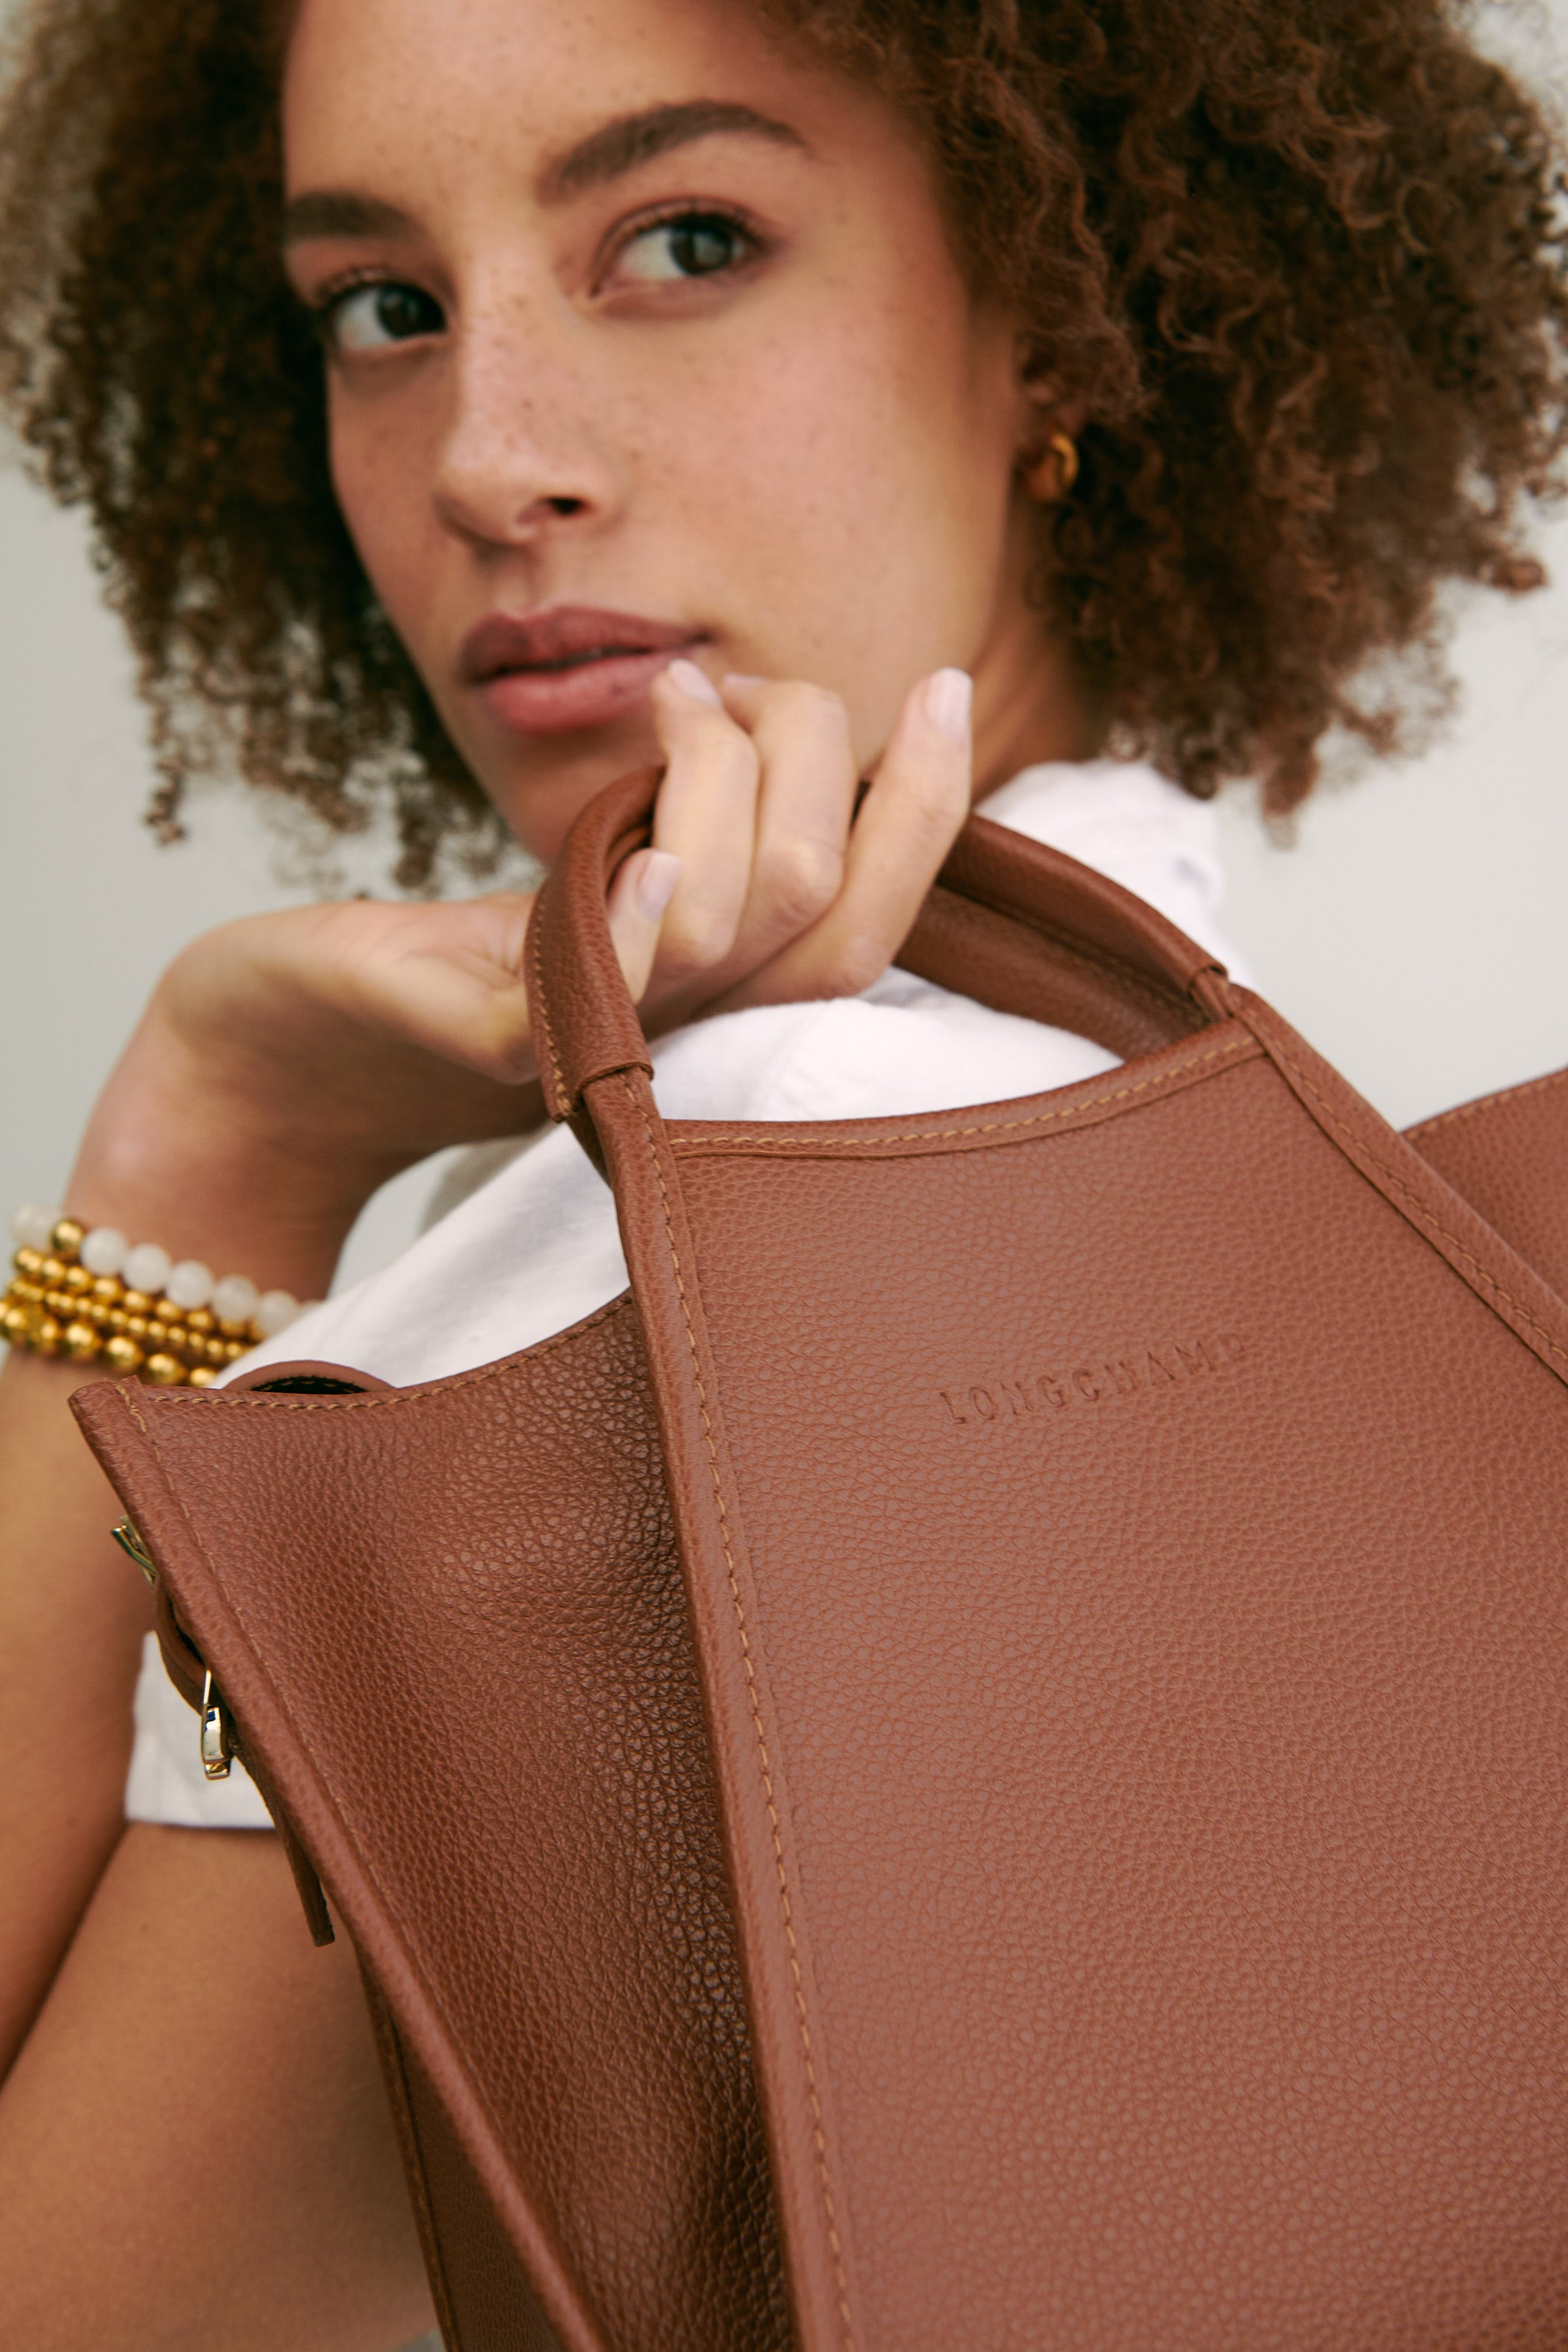 The Le Foulonné Top Handle Bag by Longchamp styled with the Zen Beaded Stretch Bracelet by Dean Davidson 